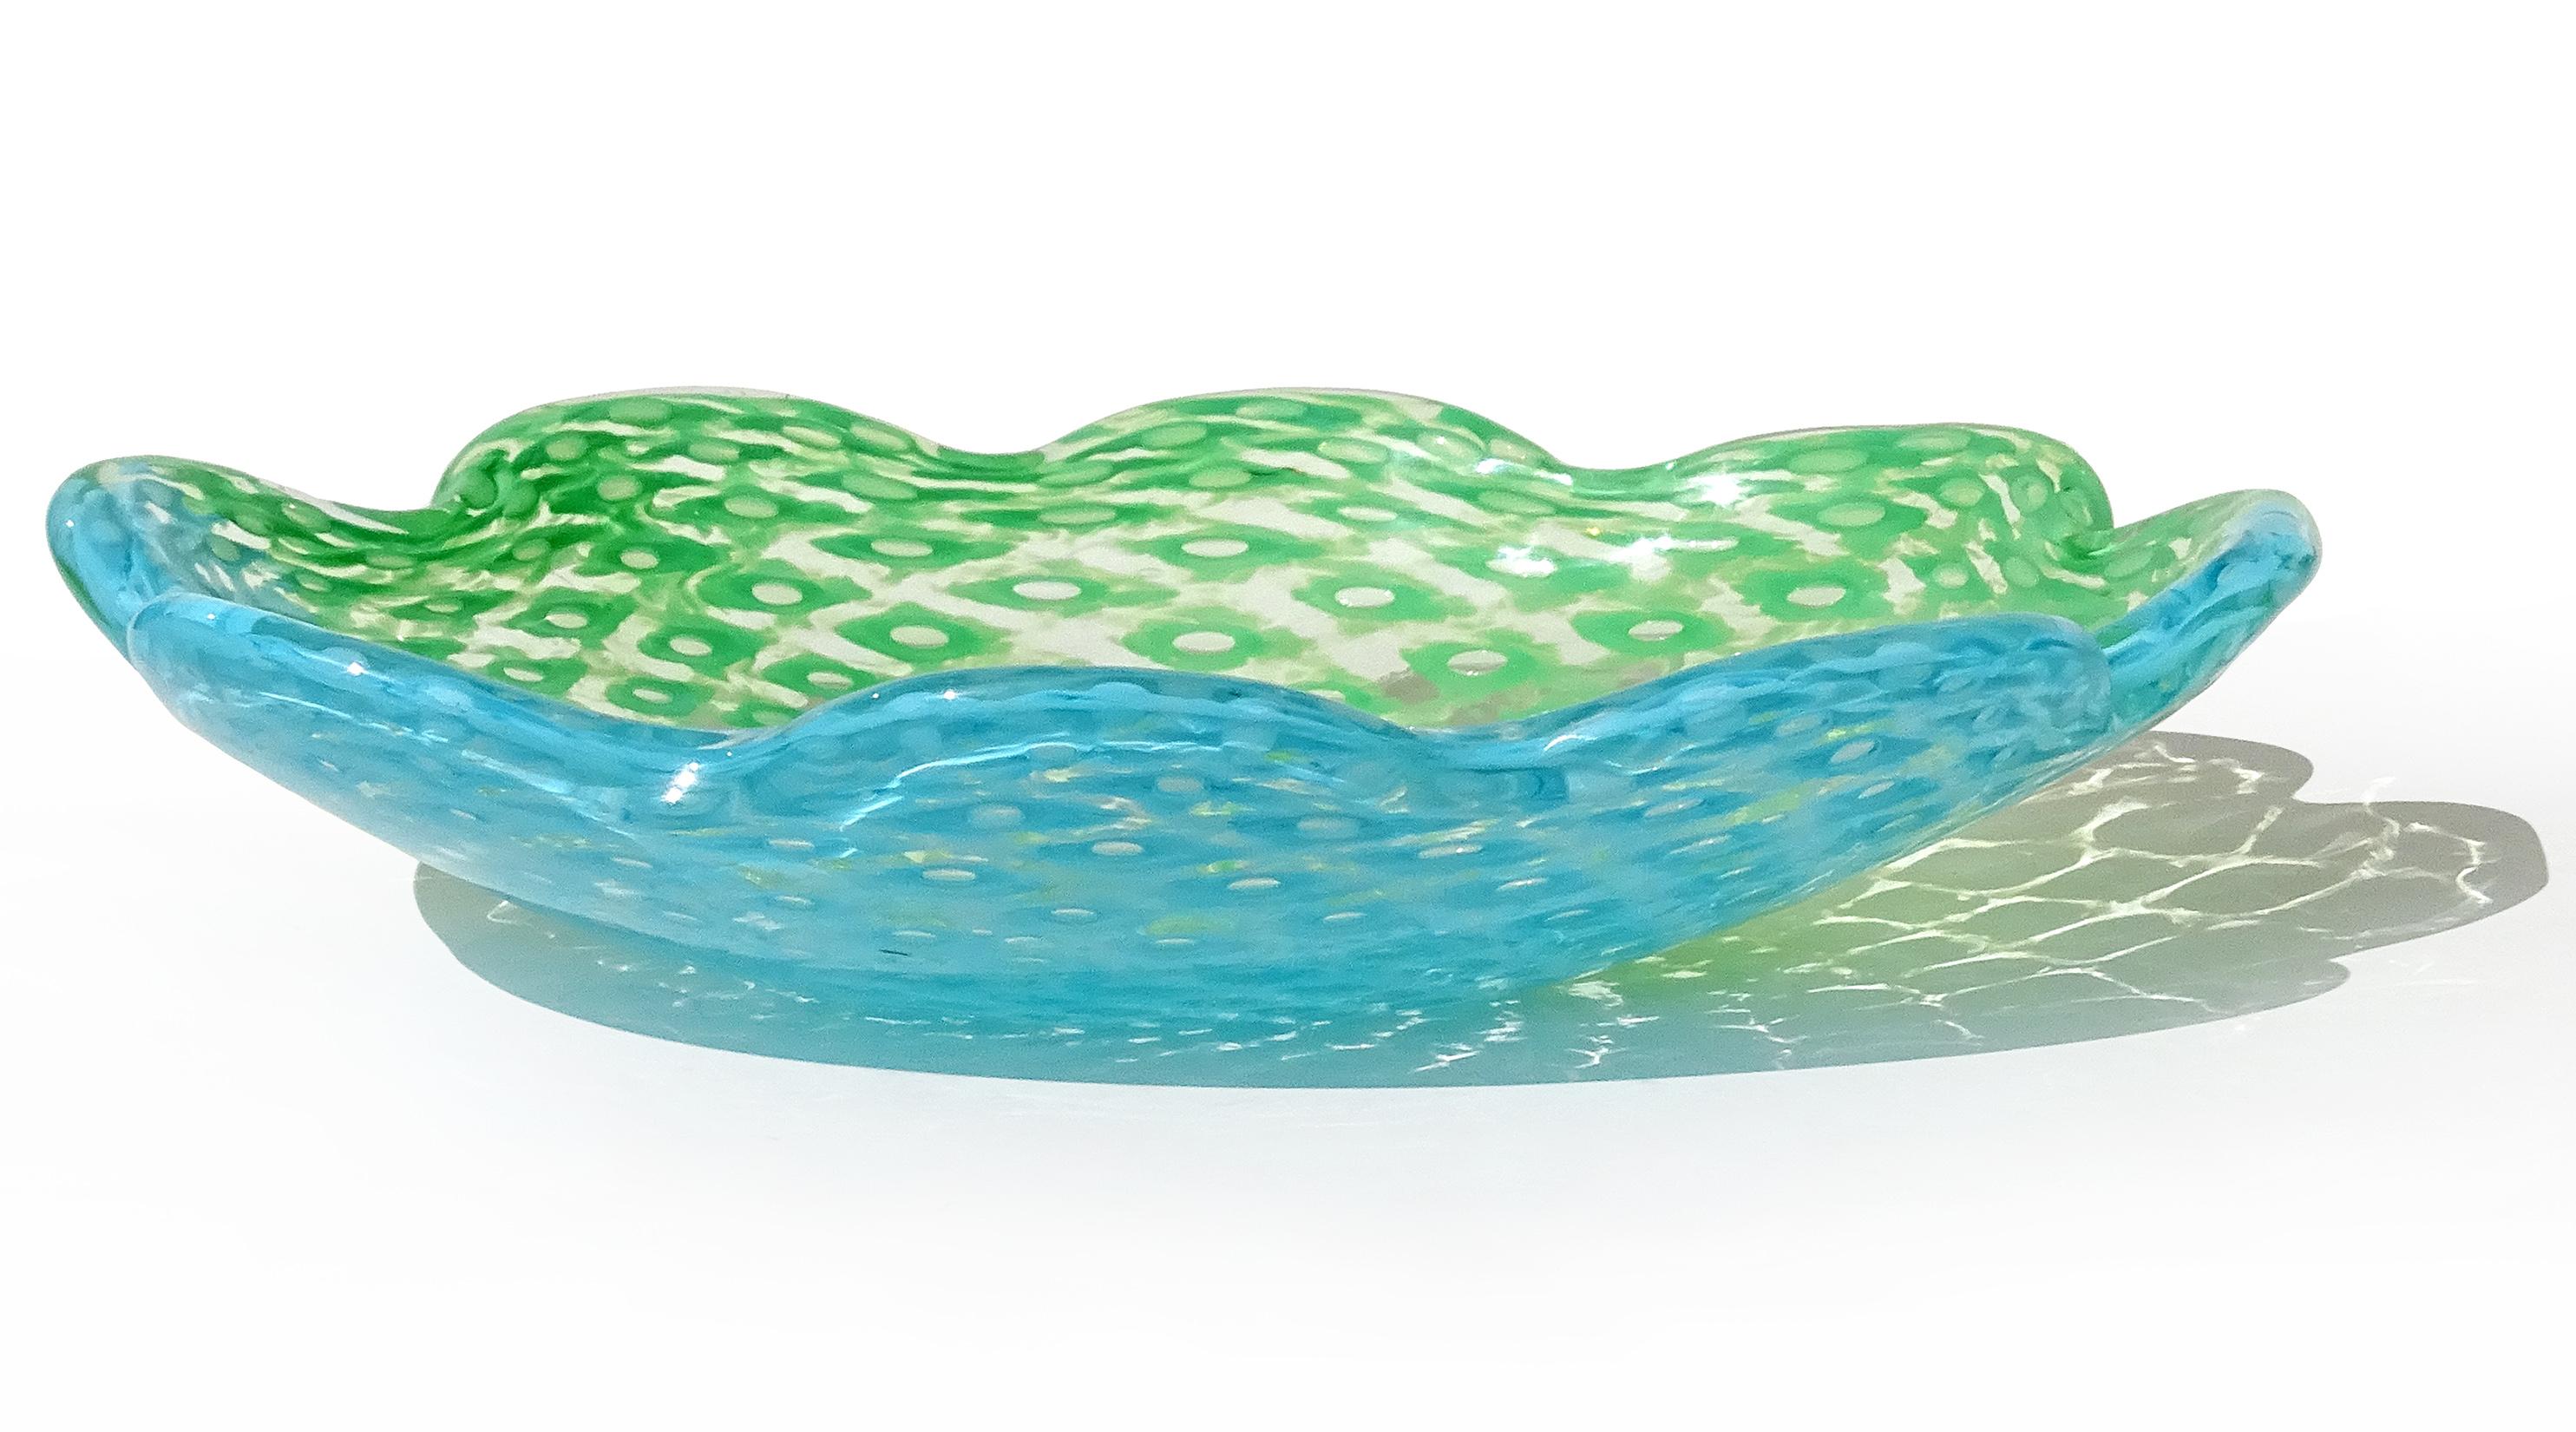 Hand-Crafted Fratelli Toso Murano Sky Blue Green Bubbles Italian Art Glass Centerpiece Bowl For Sale